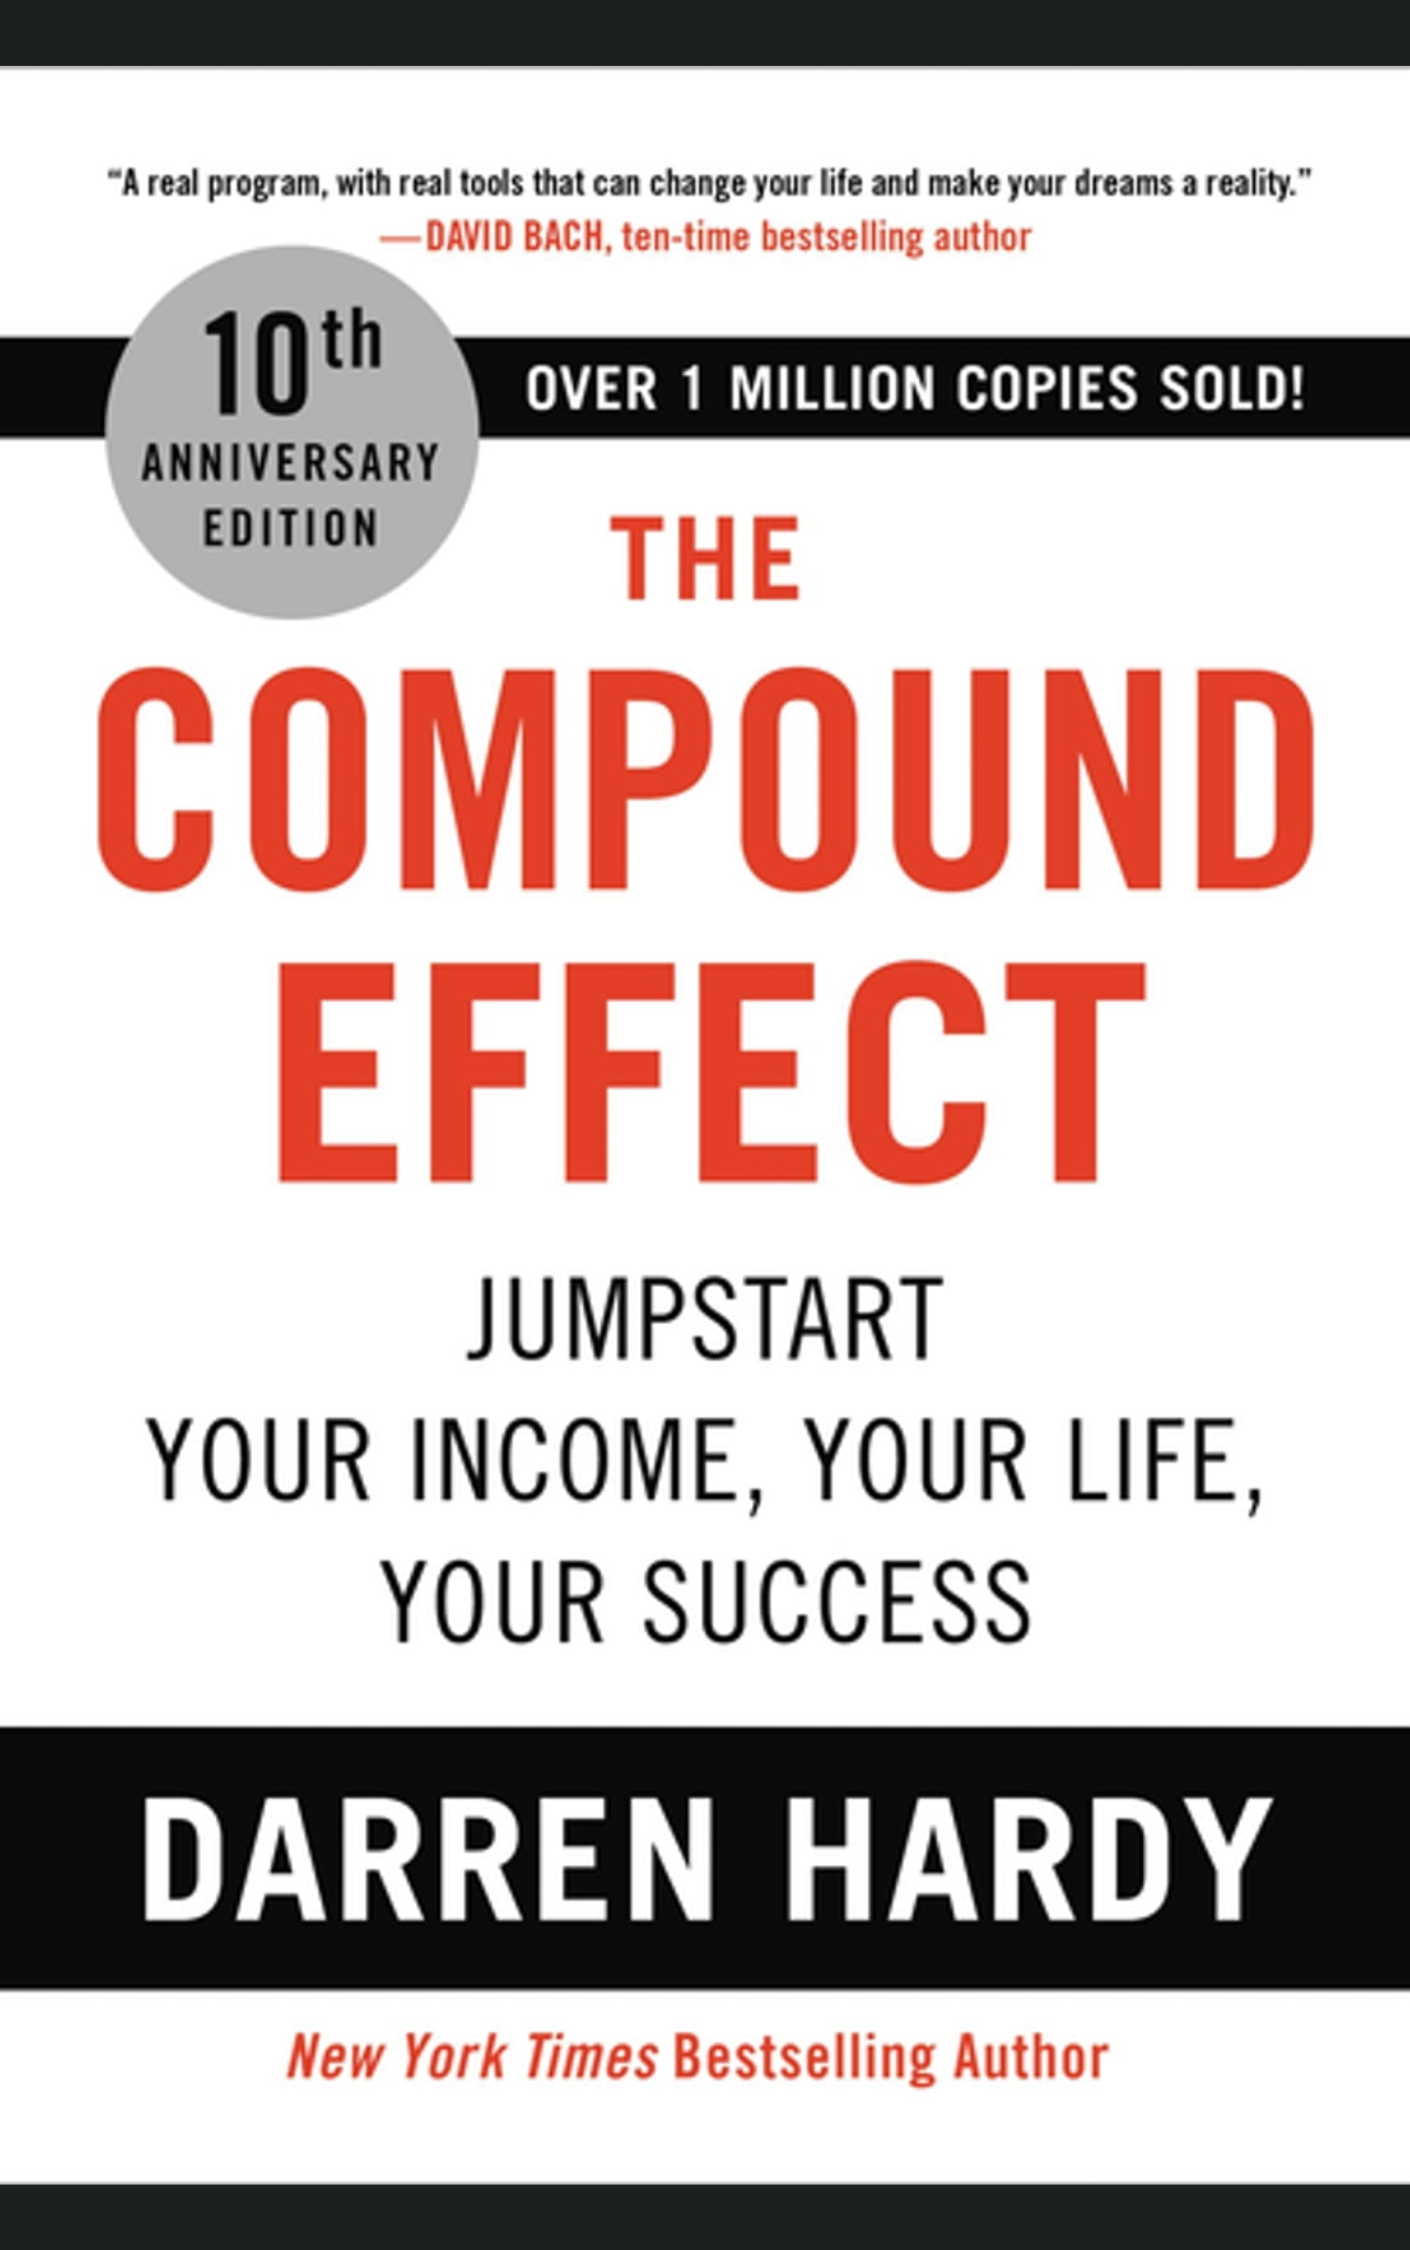 THE COMPOUND EFFECT by DARREN HARDY